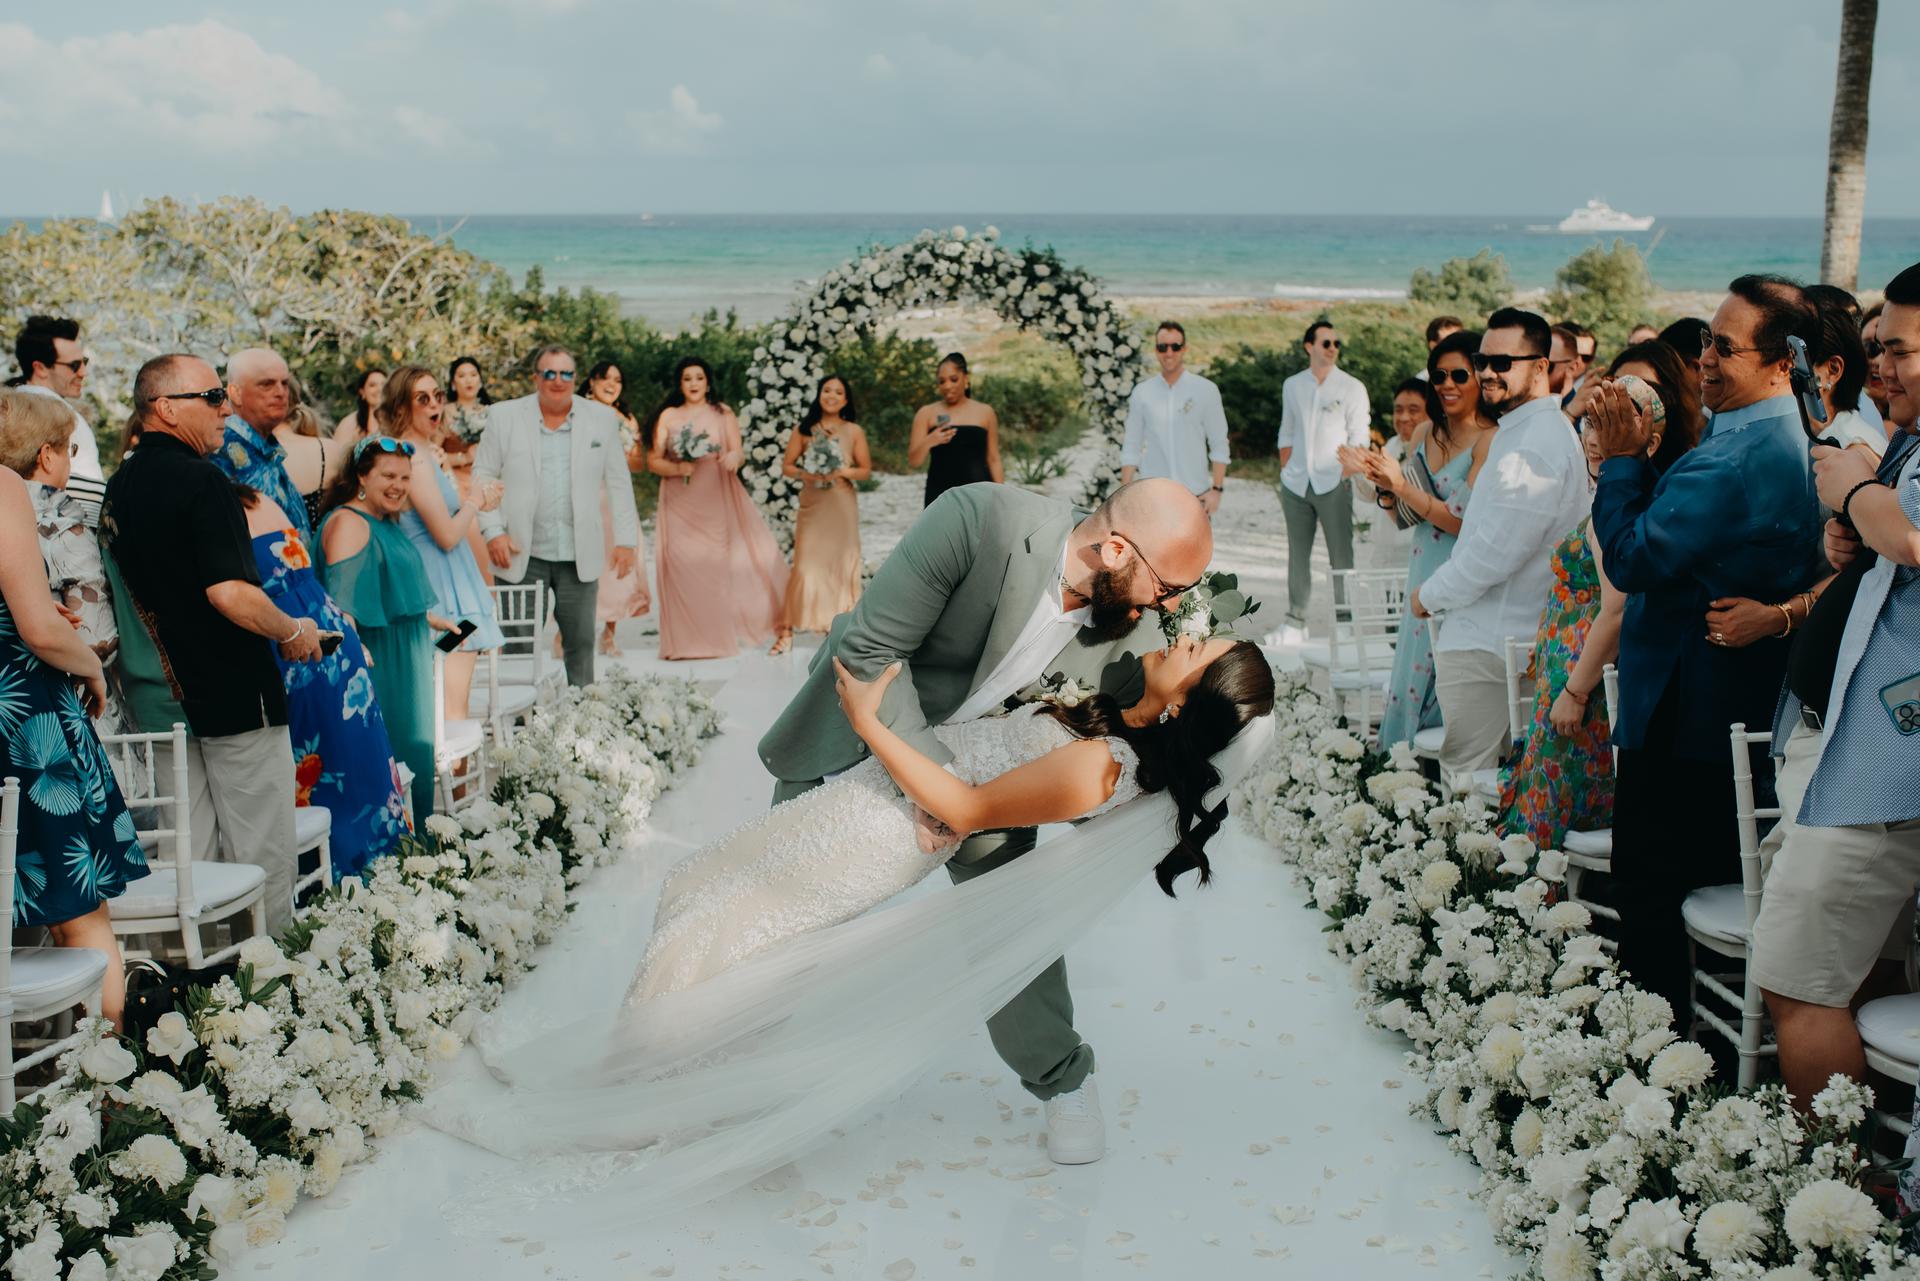 A beaming groom embraces his bride and leans her back for a kiss after saying, “I do,” while a clapping crowd watches. A sandy beach and white floral structures shine in the afternoon sun behind them.